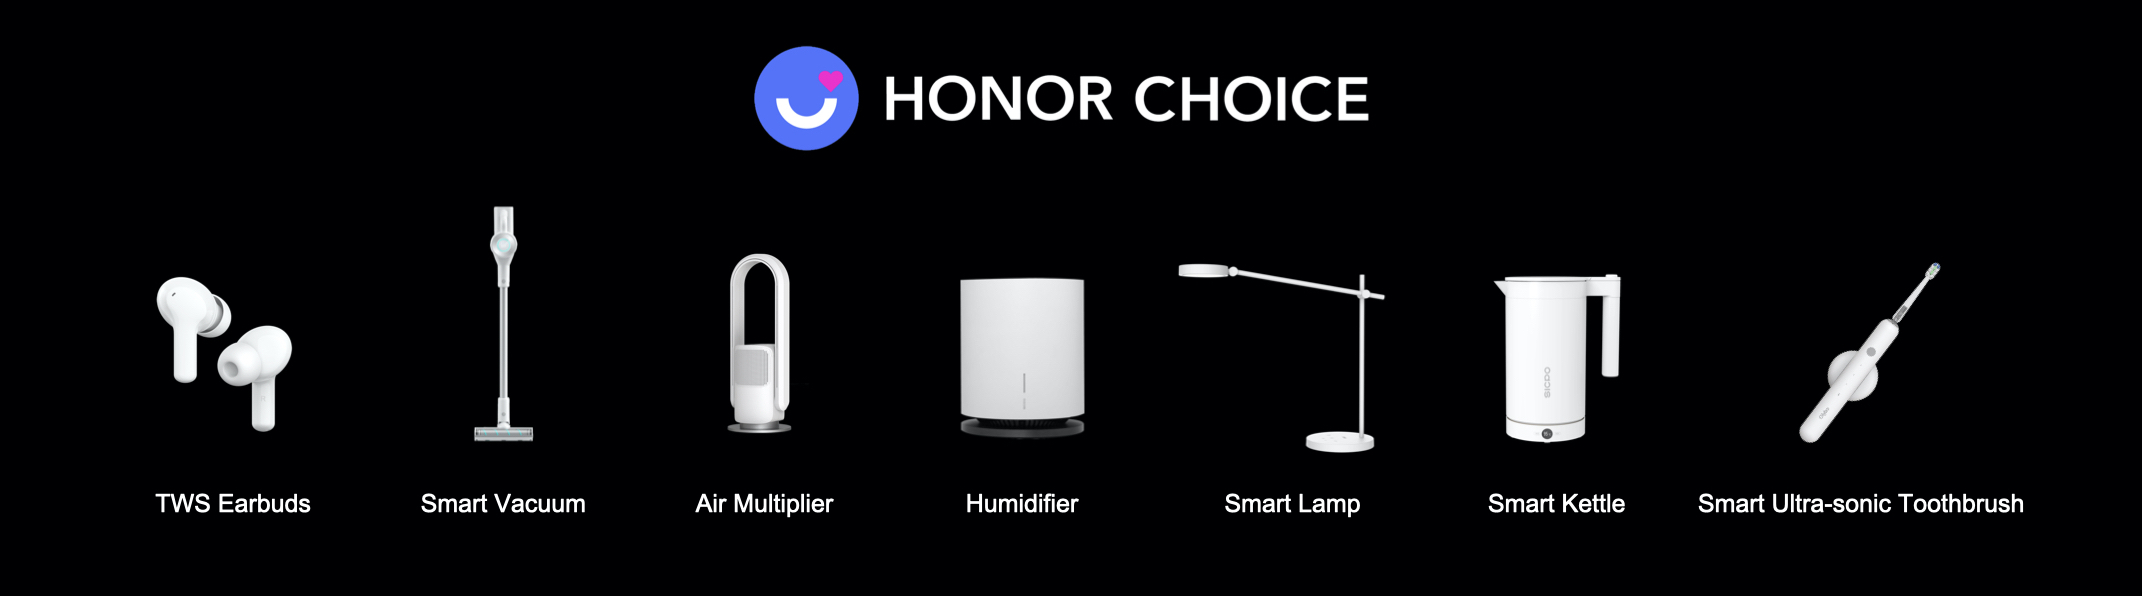 Honor choice watch white. Honor choice Earbuds x размер. Honor choice Earbuds x управление. Honor choice Earbuds x3. Honor choice Earbuds x насадки.